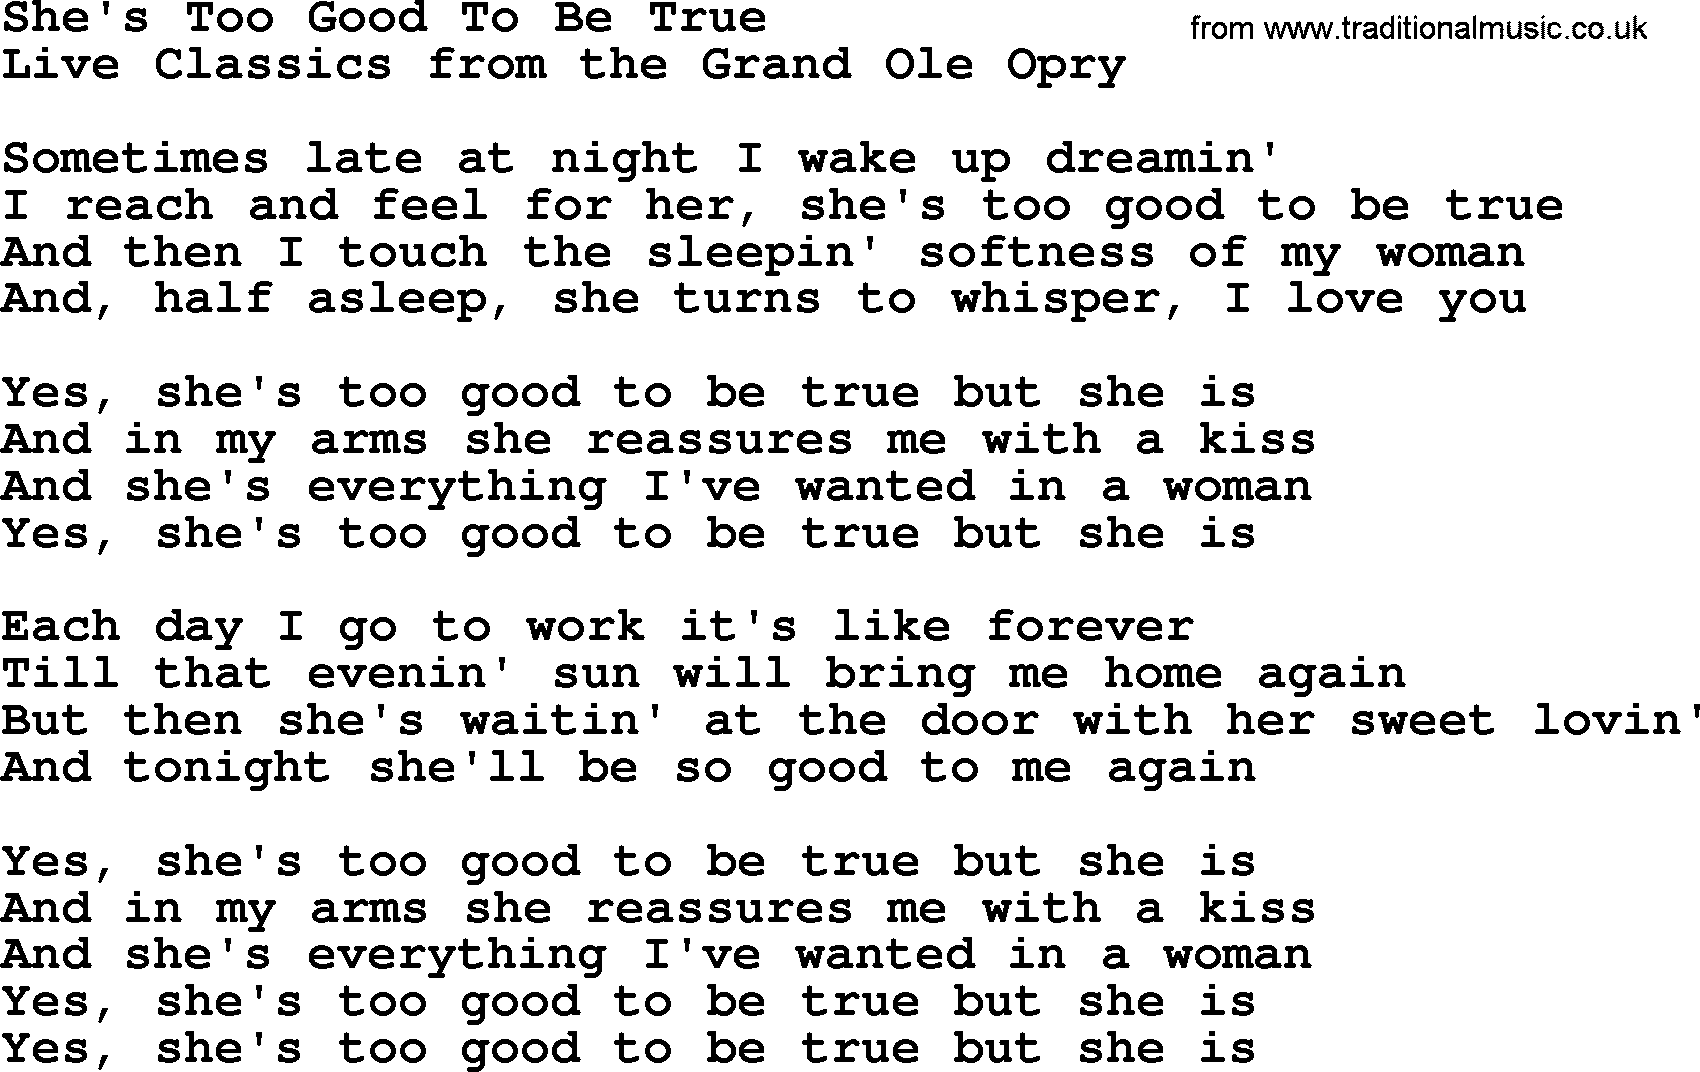 Marty Robbins song: Shes Too Good To Be True, lyrics